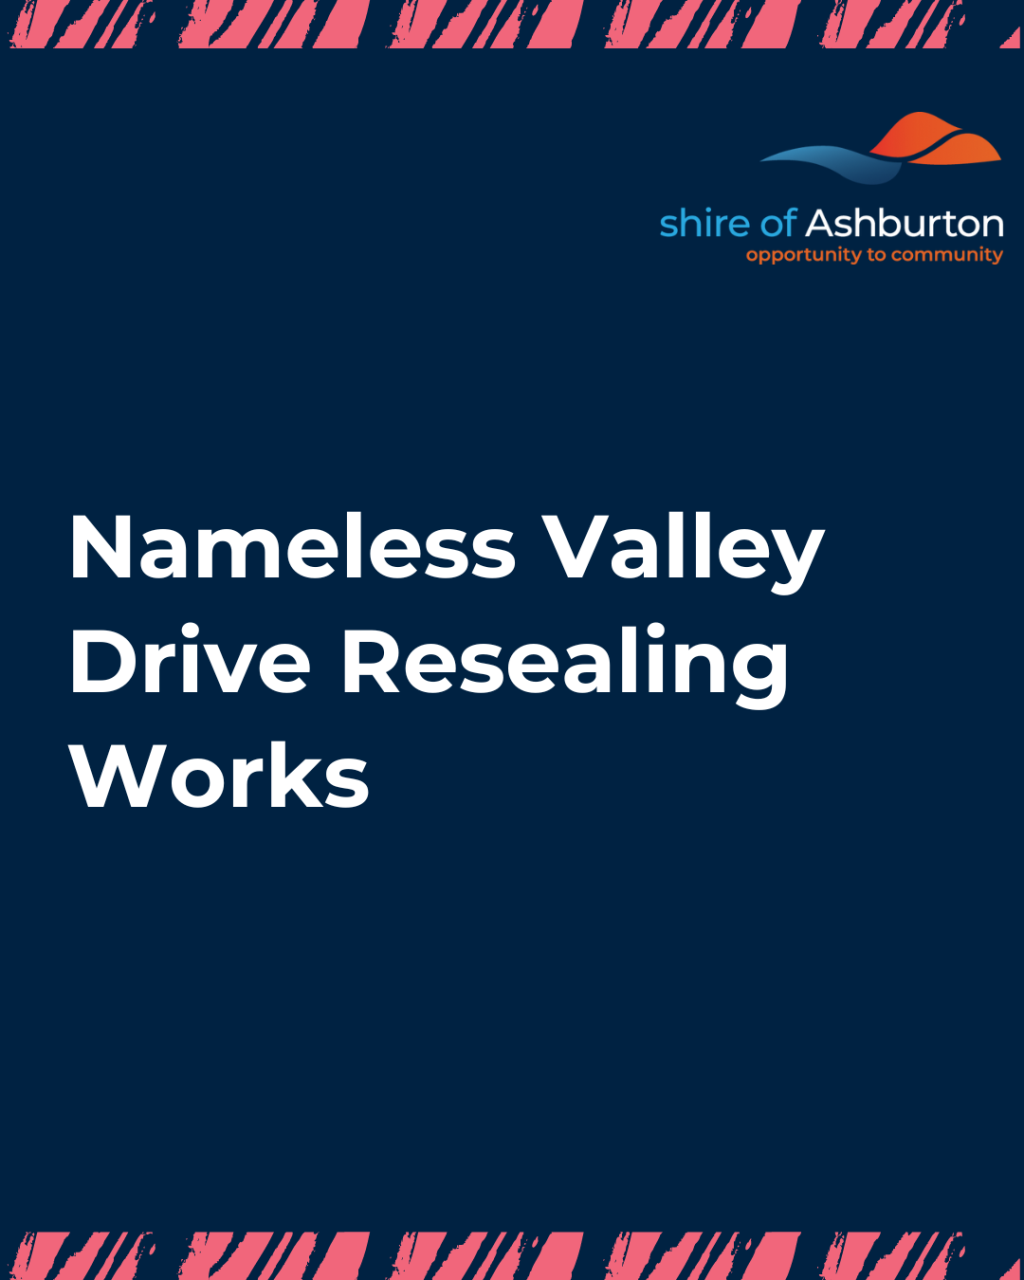 Nameless Valley Drive Resealing Works